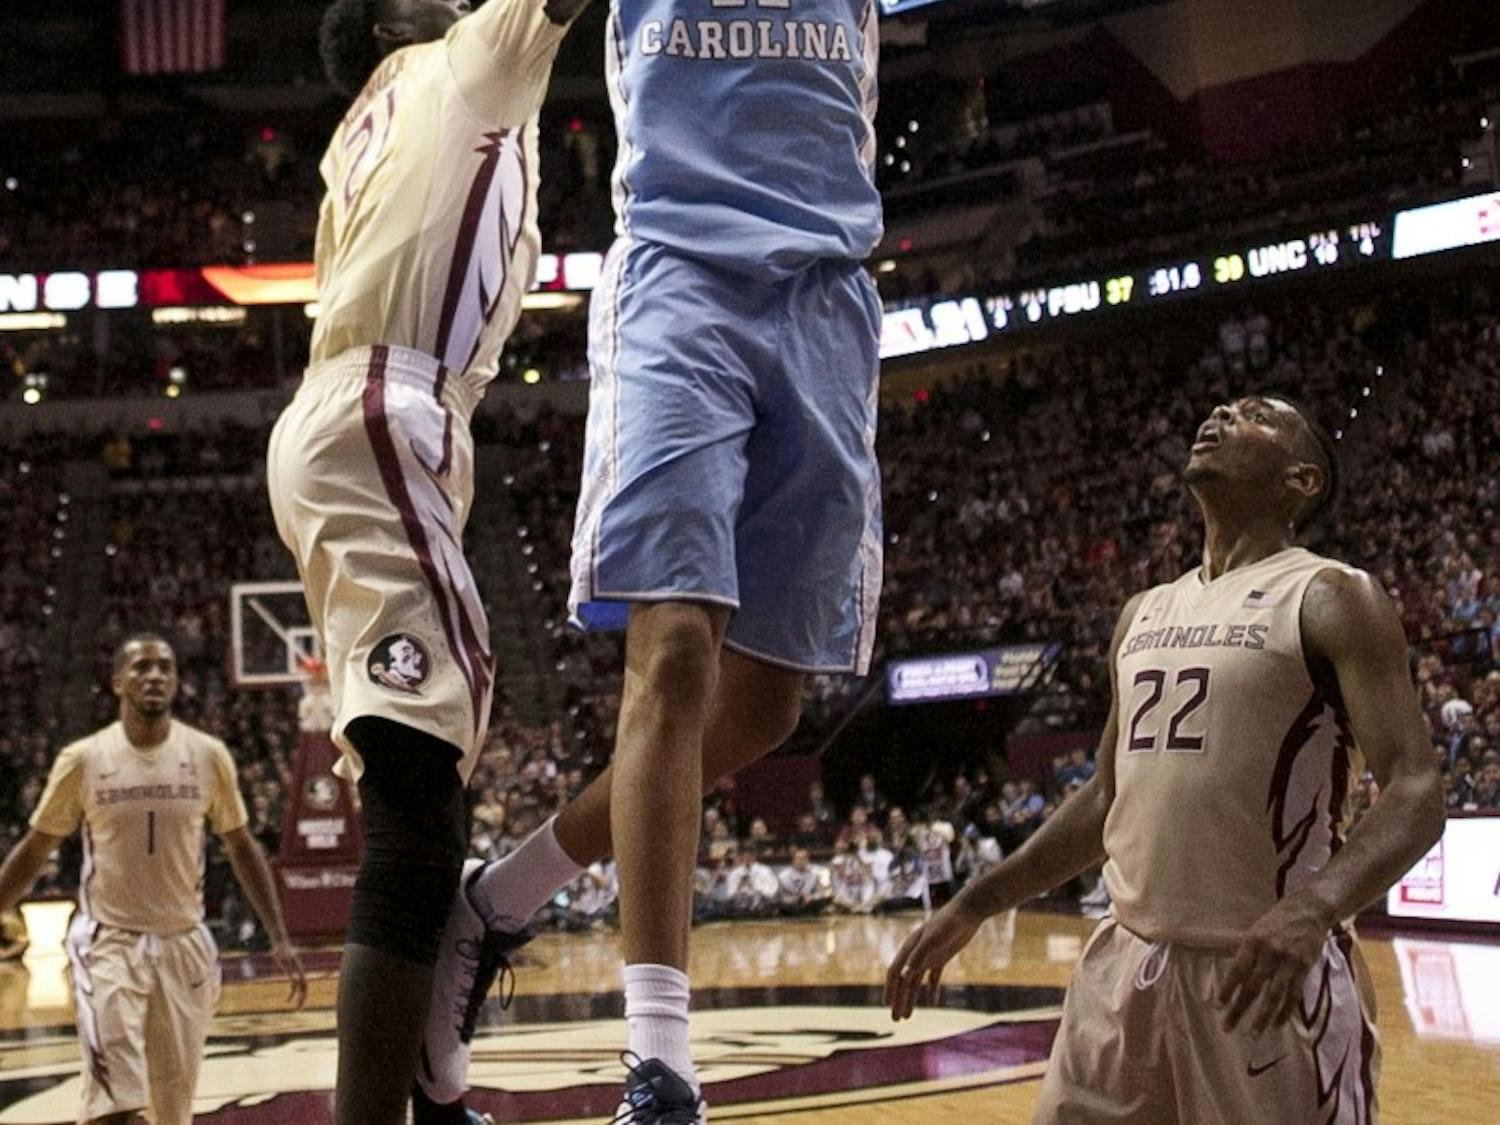 North Carolina's Brice Johnson (11) dunks for two of his career high 39 points over Florida State's Chris Koumadje (21) and Xavier Rathan-Mayes (22) on Monday, Jan. 4, 2016, at the Tucker Center in Tallahassee, Fla. (Robert Willett/Raleigh News & Observer/TNS)